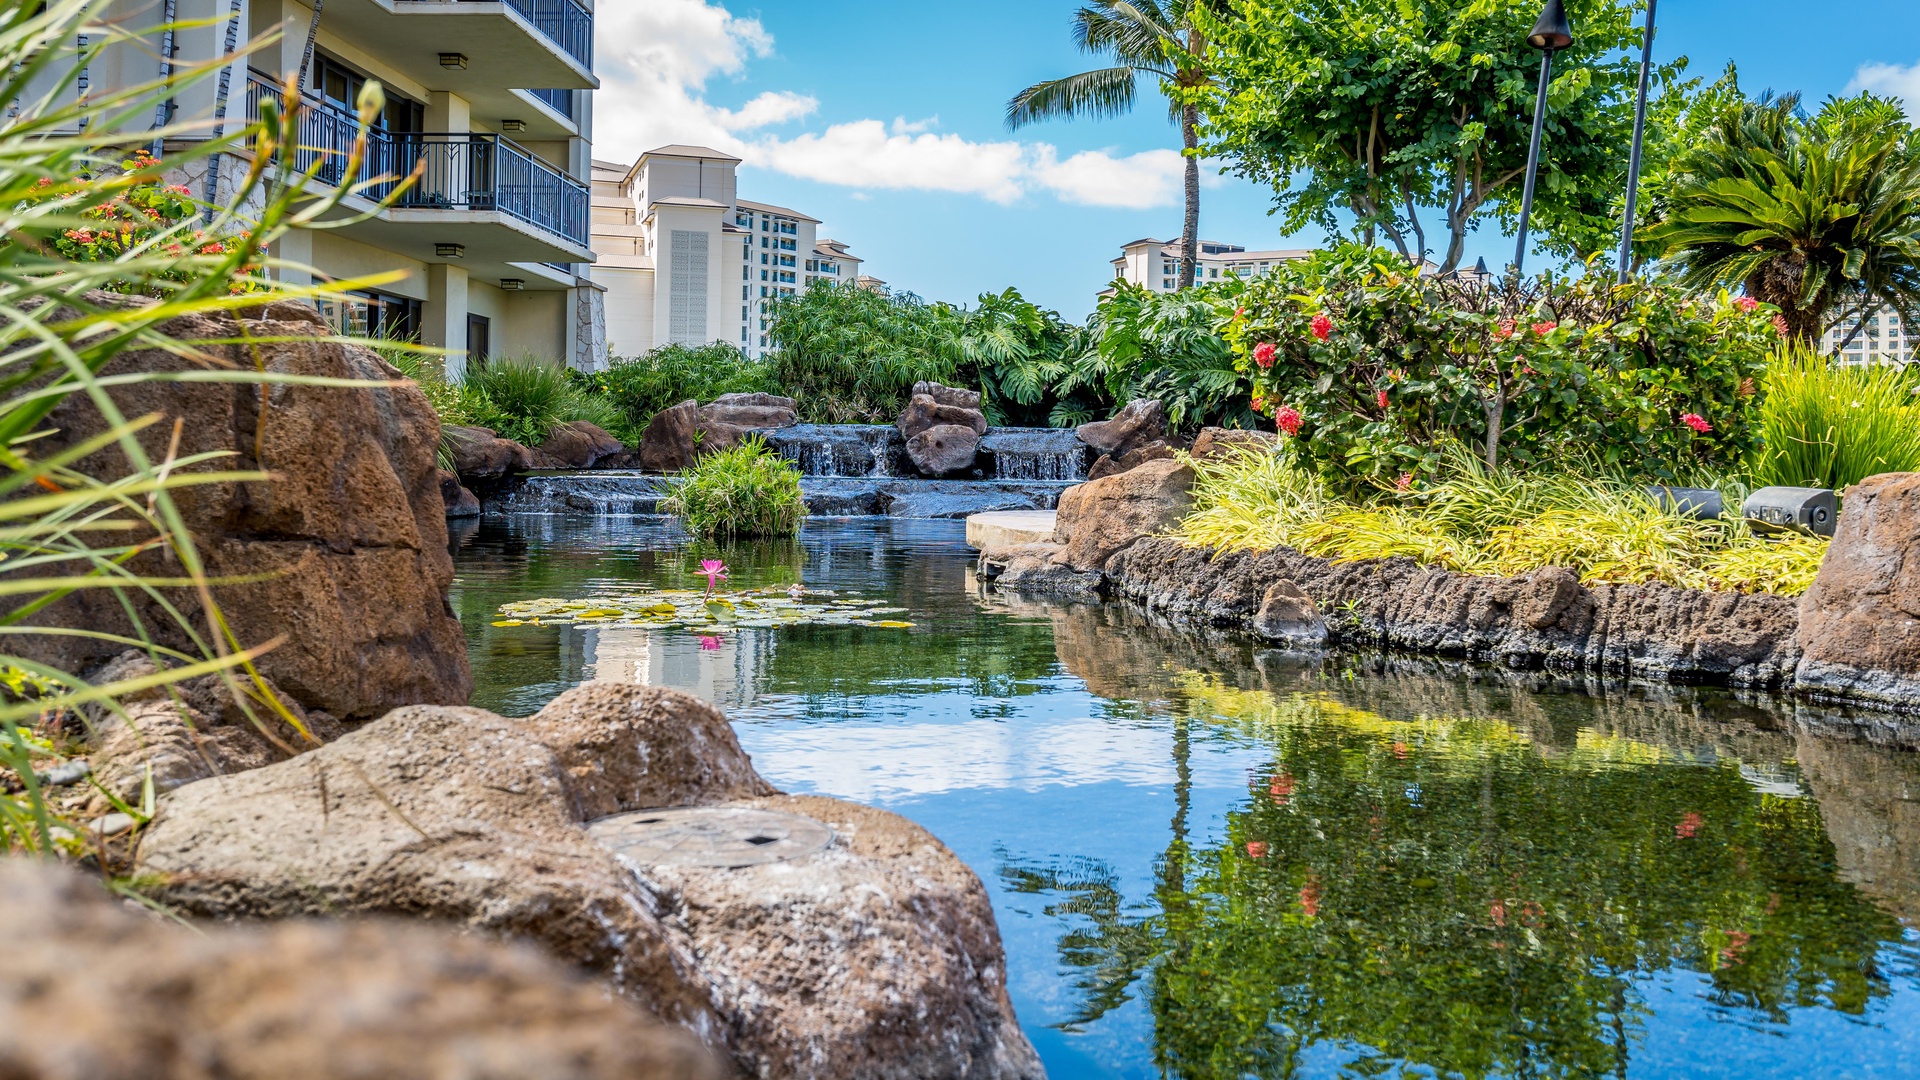 Kapolei Vacation Rentals, Ko Olina Beach Villas O905 - Walk the grounds to discover local flowers and hidden moments.